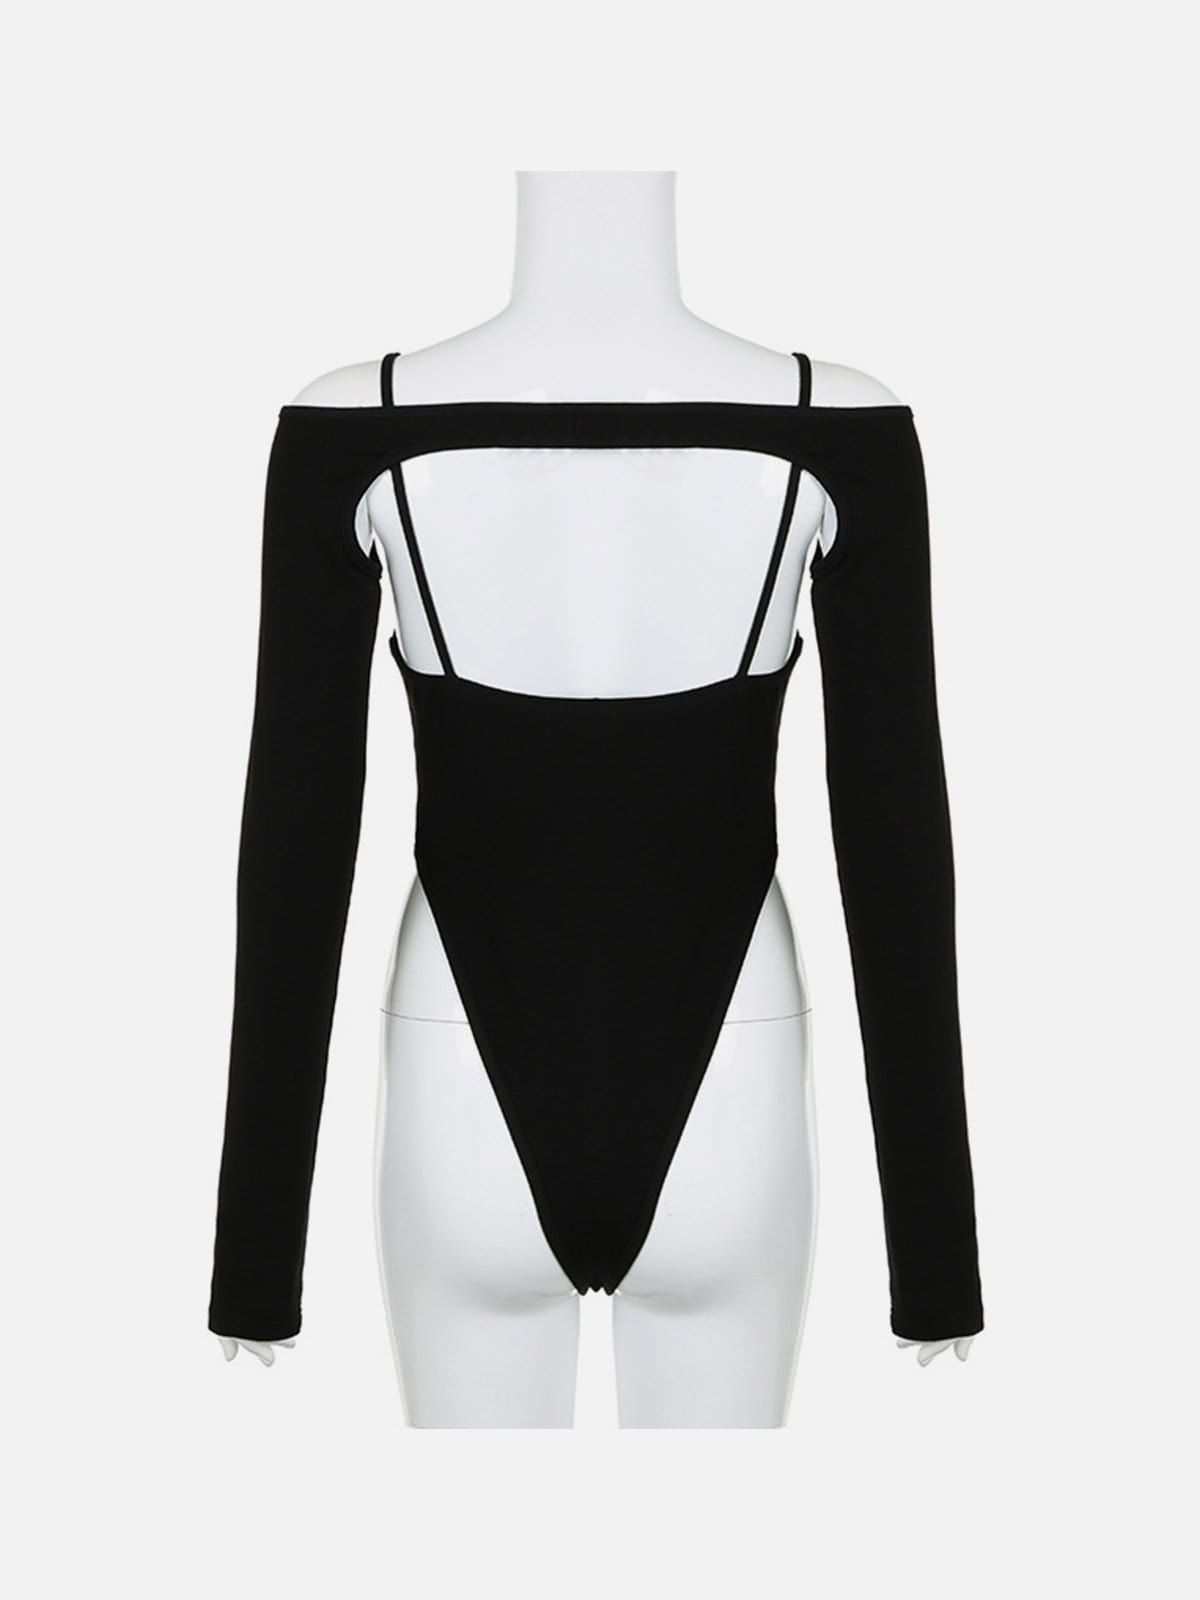 NEV Button Covered Bodysuit